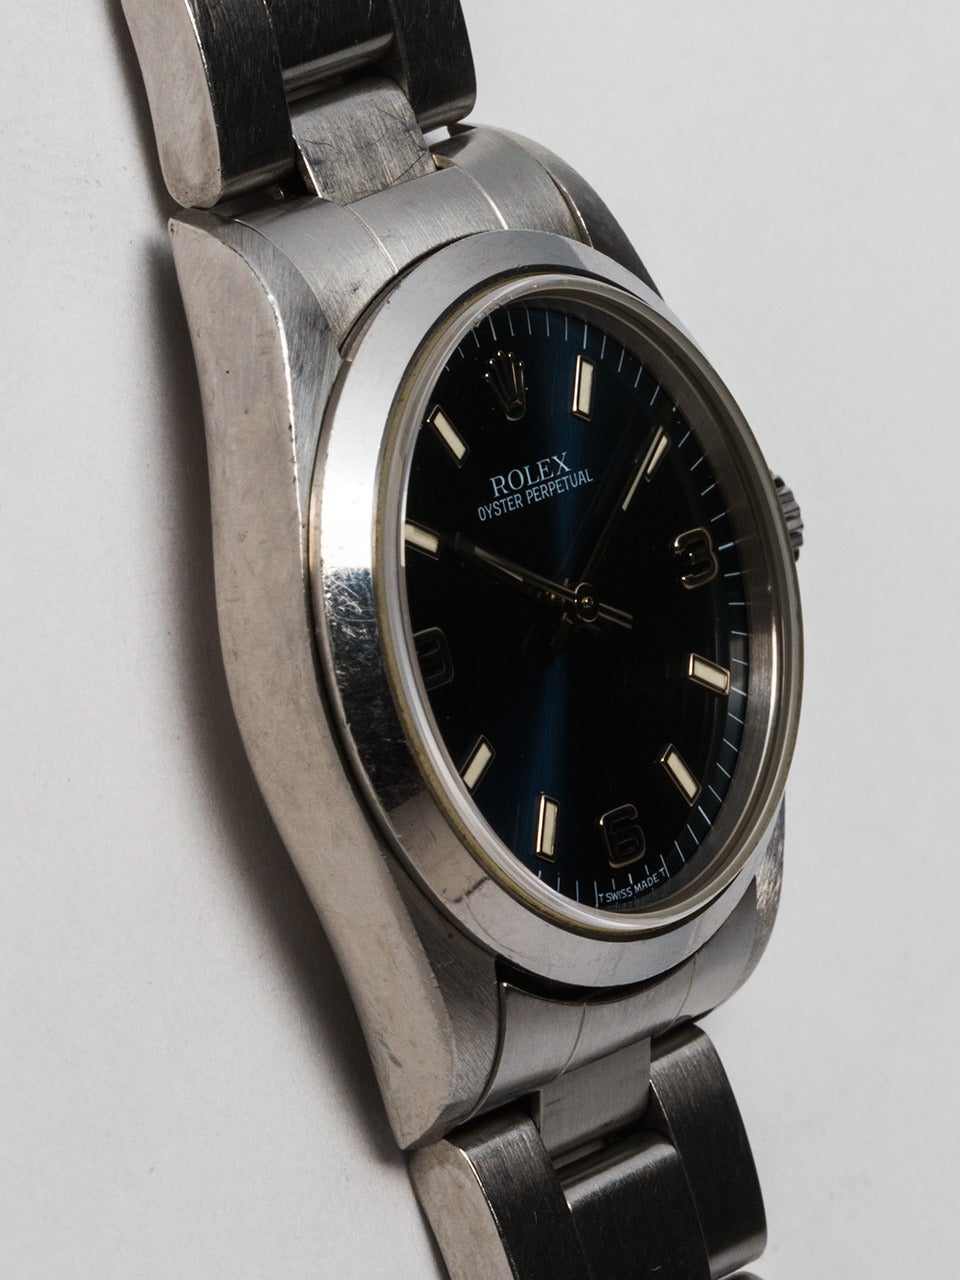 Rolex stainless midsize Oyster Perpetual wristwatch, Ref. 67480, serial number U4, circa 1997. 31mm case with smooth bezel and sapphire crystal. Blue 3/6/9 Explorer style dial. Self-winding movement with sweep seconds. With Rolex stainless steel